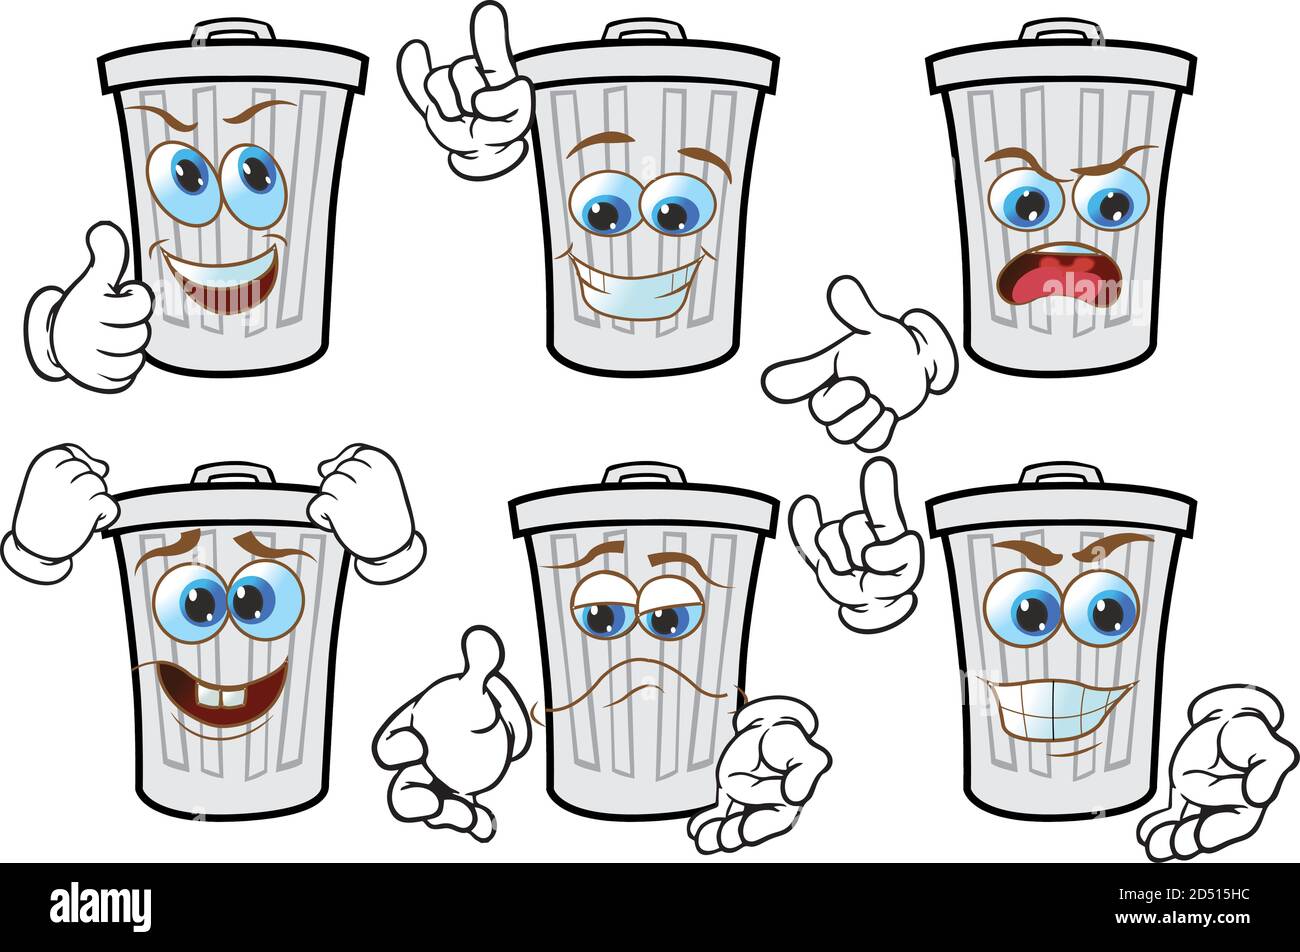 https://c8.alamy.com/comp/2D515HC/a-vector-set-of-drawing-trash-cans-in-different-situations-drawing-mascots-2D515HC.jpg